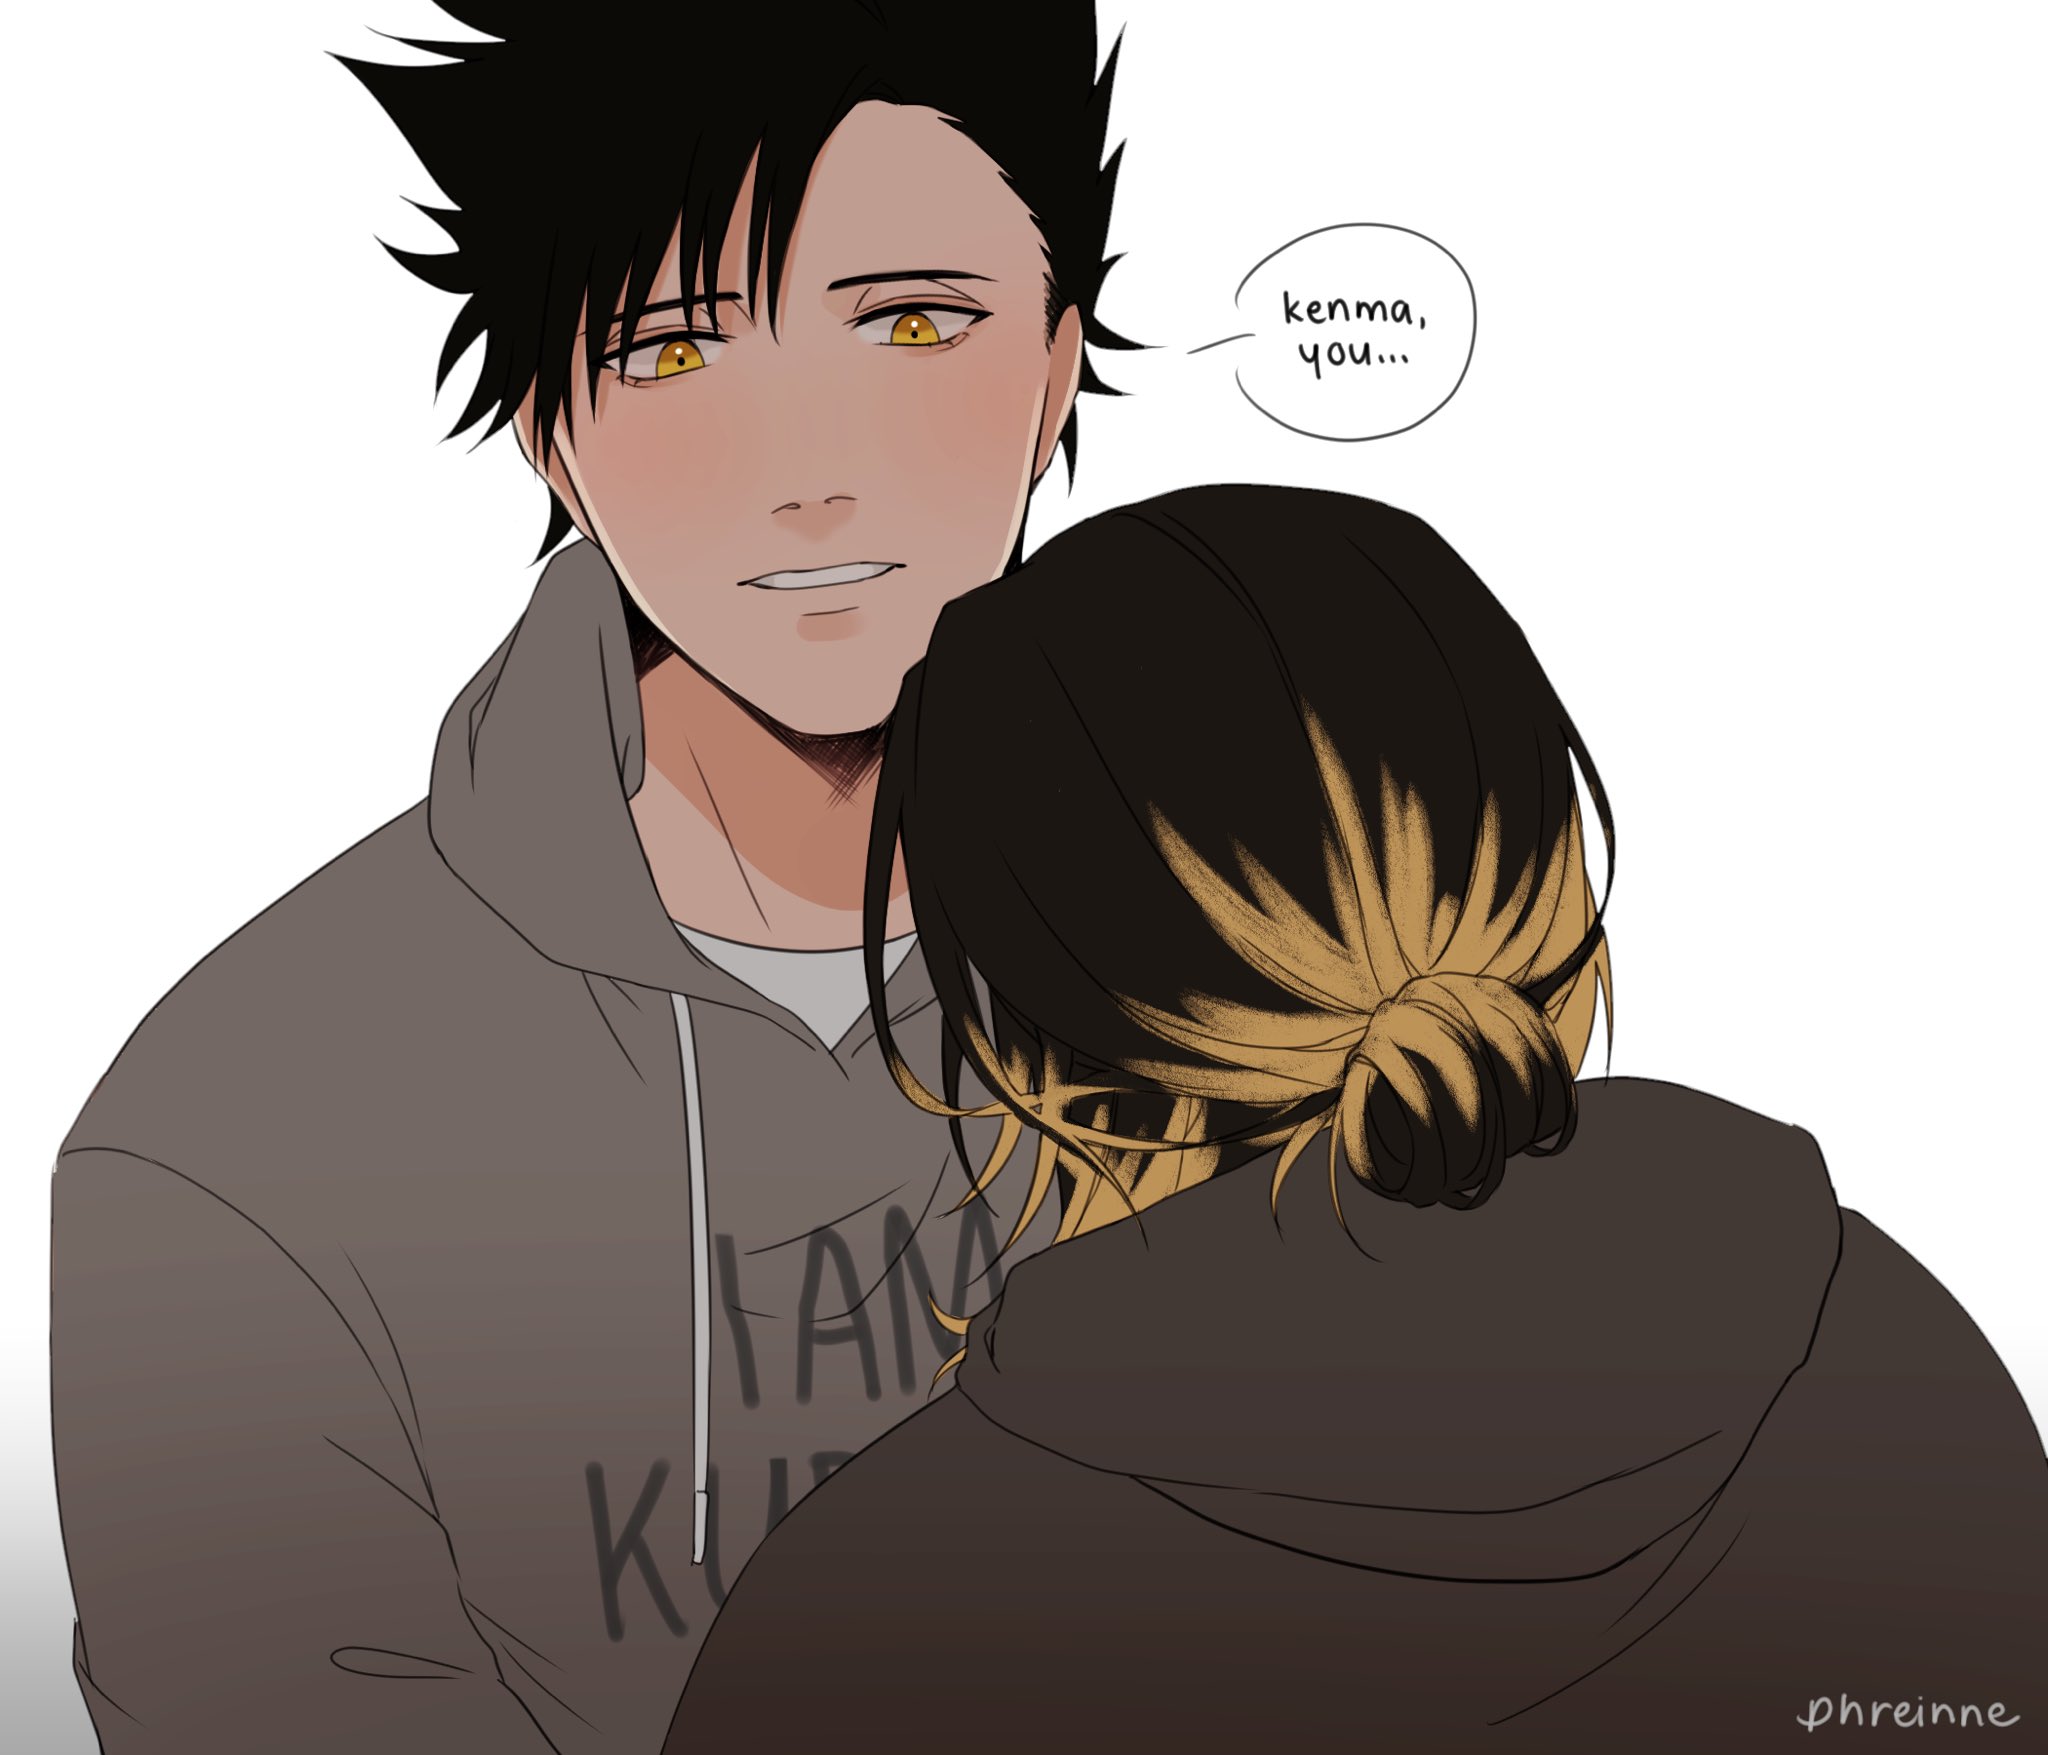 23. happy kuroken day 05.01! have some friends to lovers to idiots krkn. 